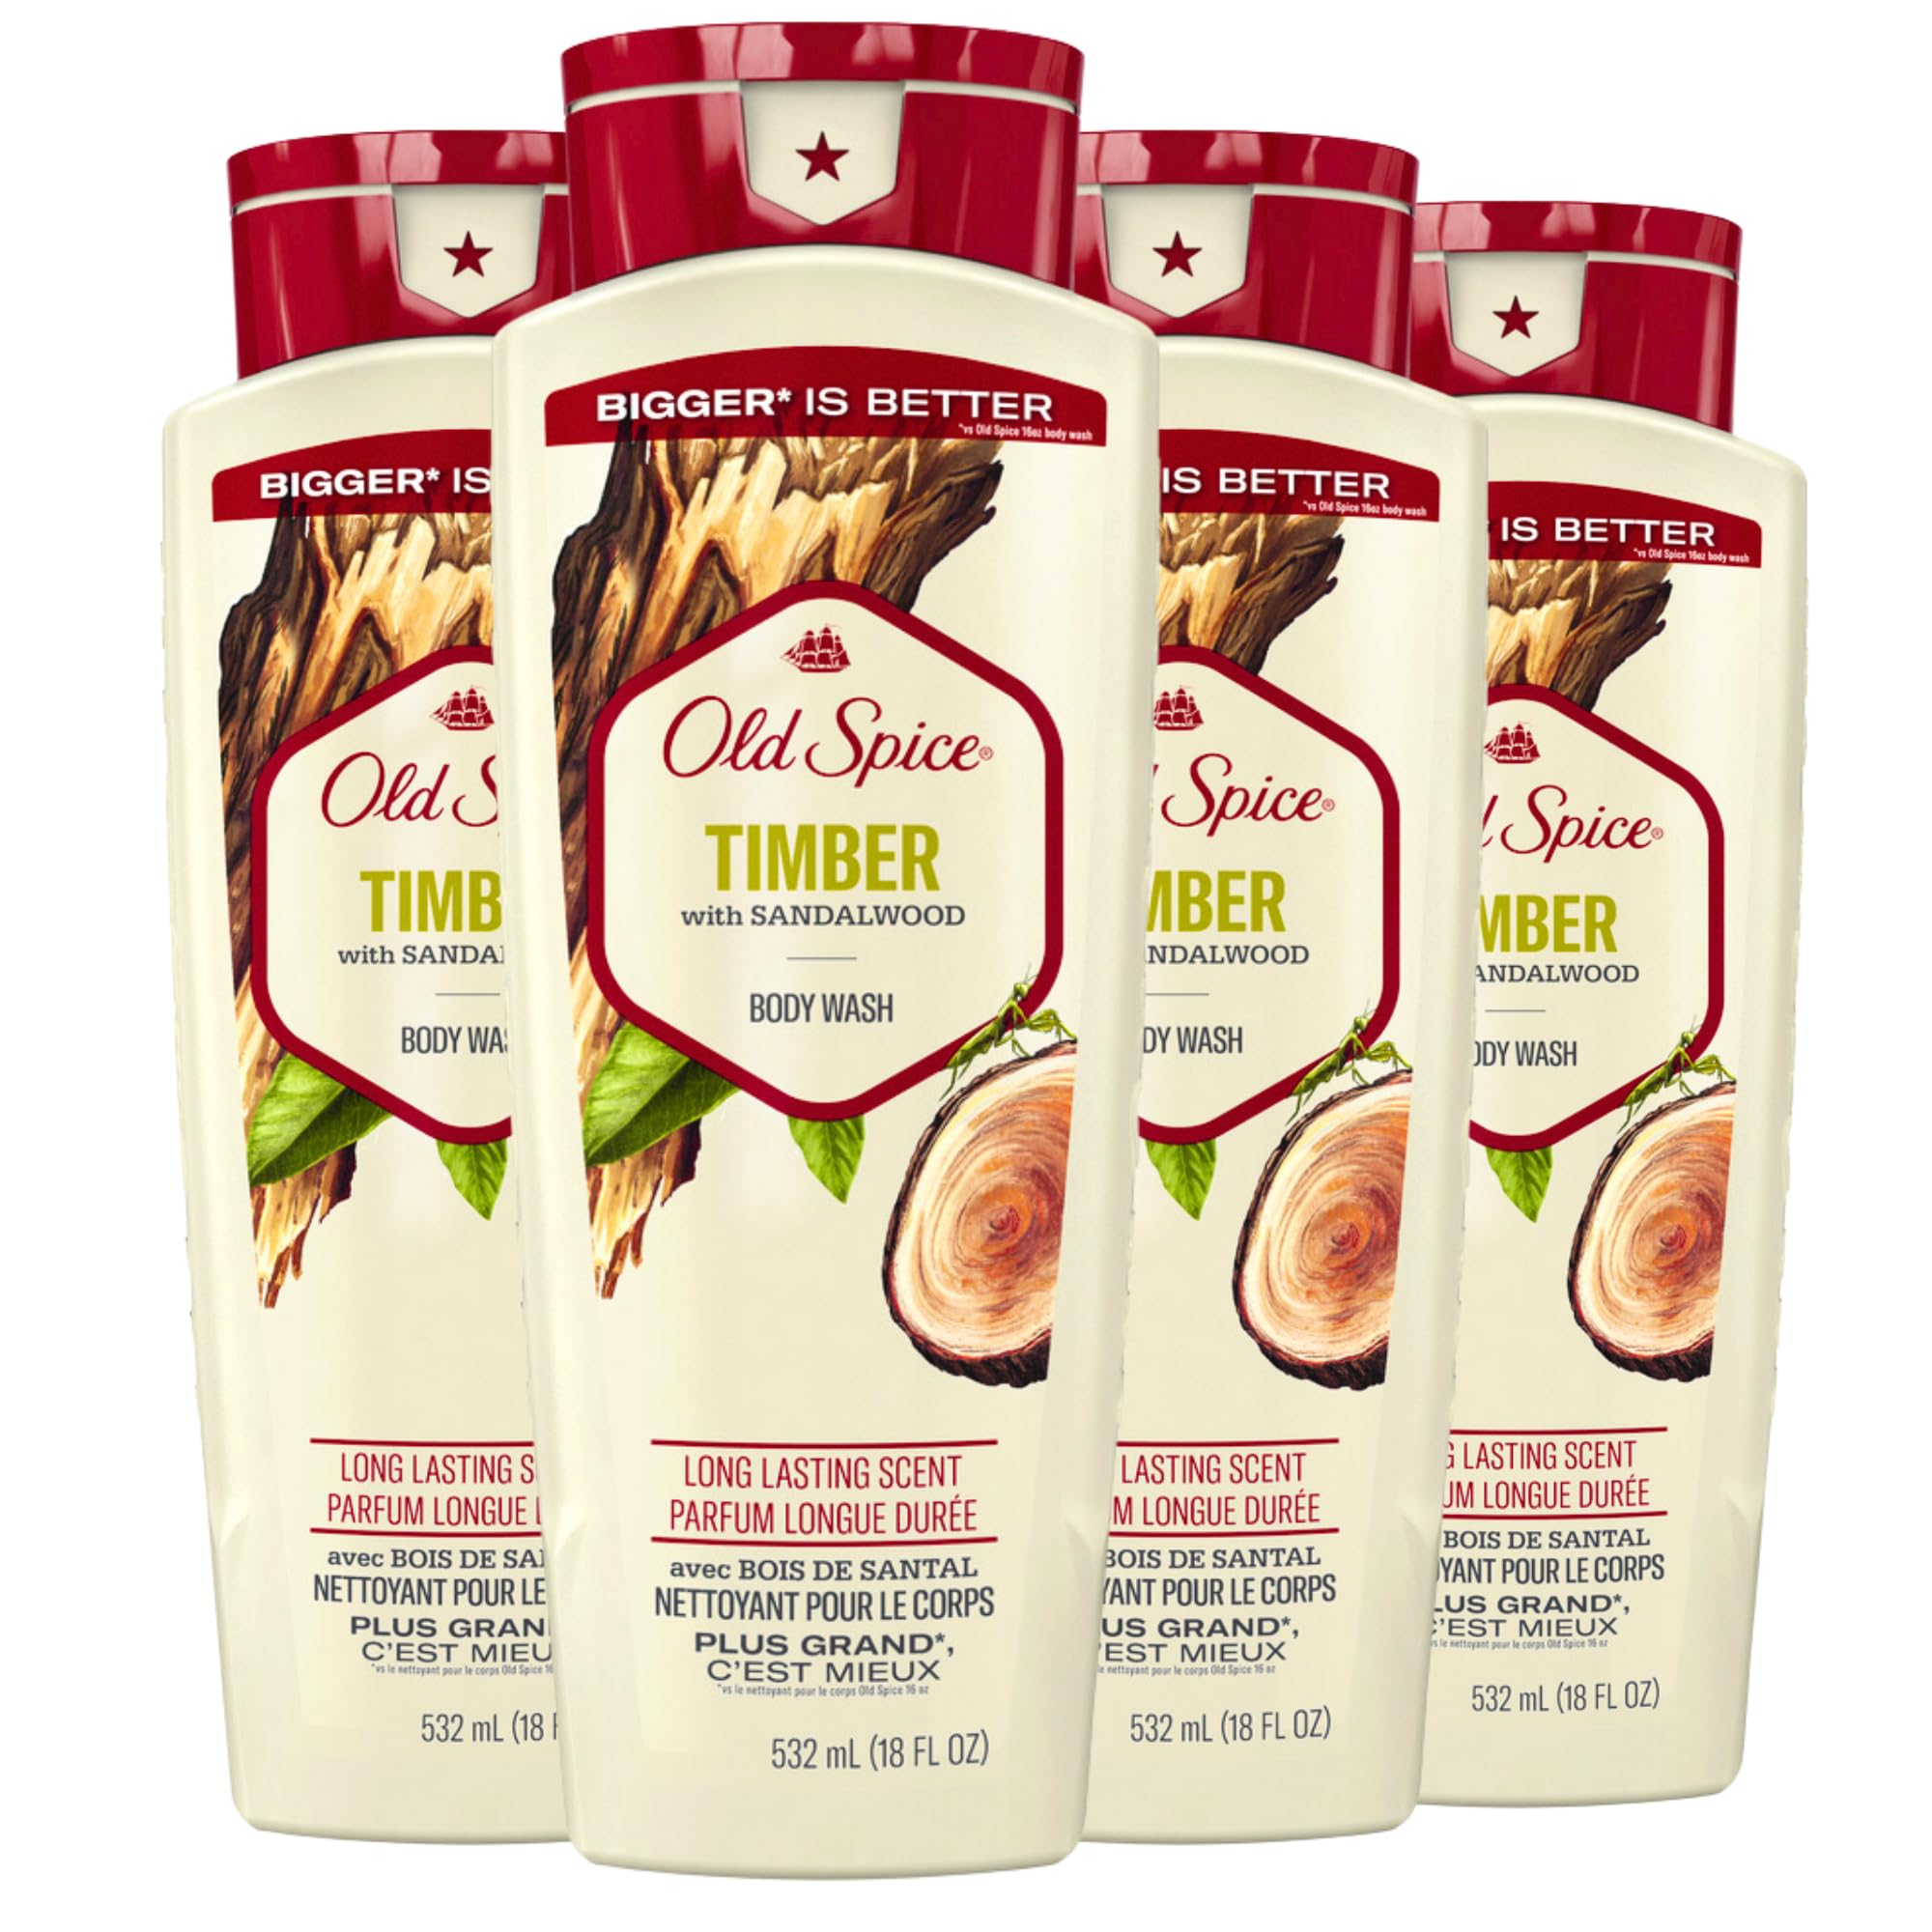 Old Spice Fresher Timber Scent Body Wash for Men, 18 oz (Pack of 4)